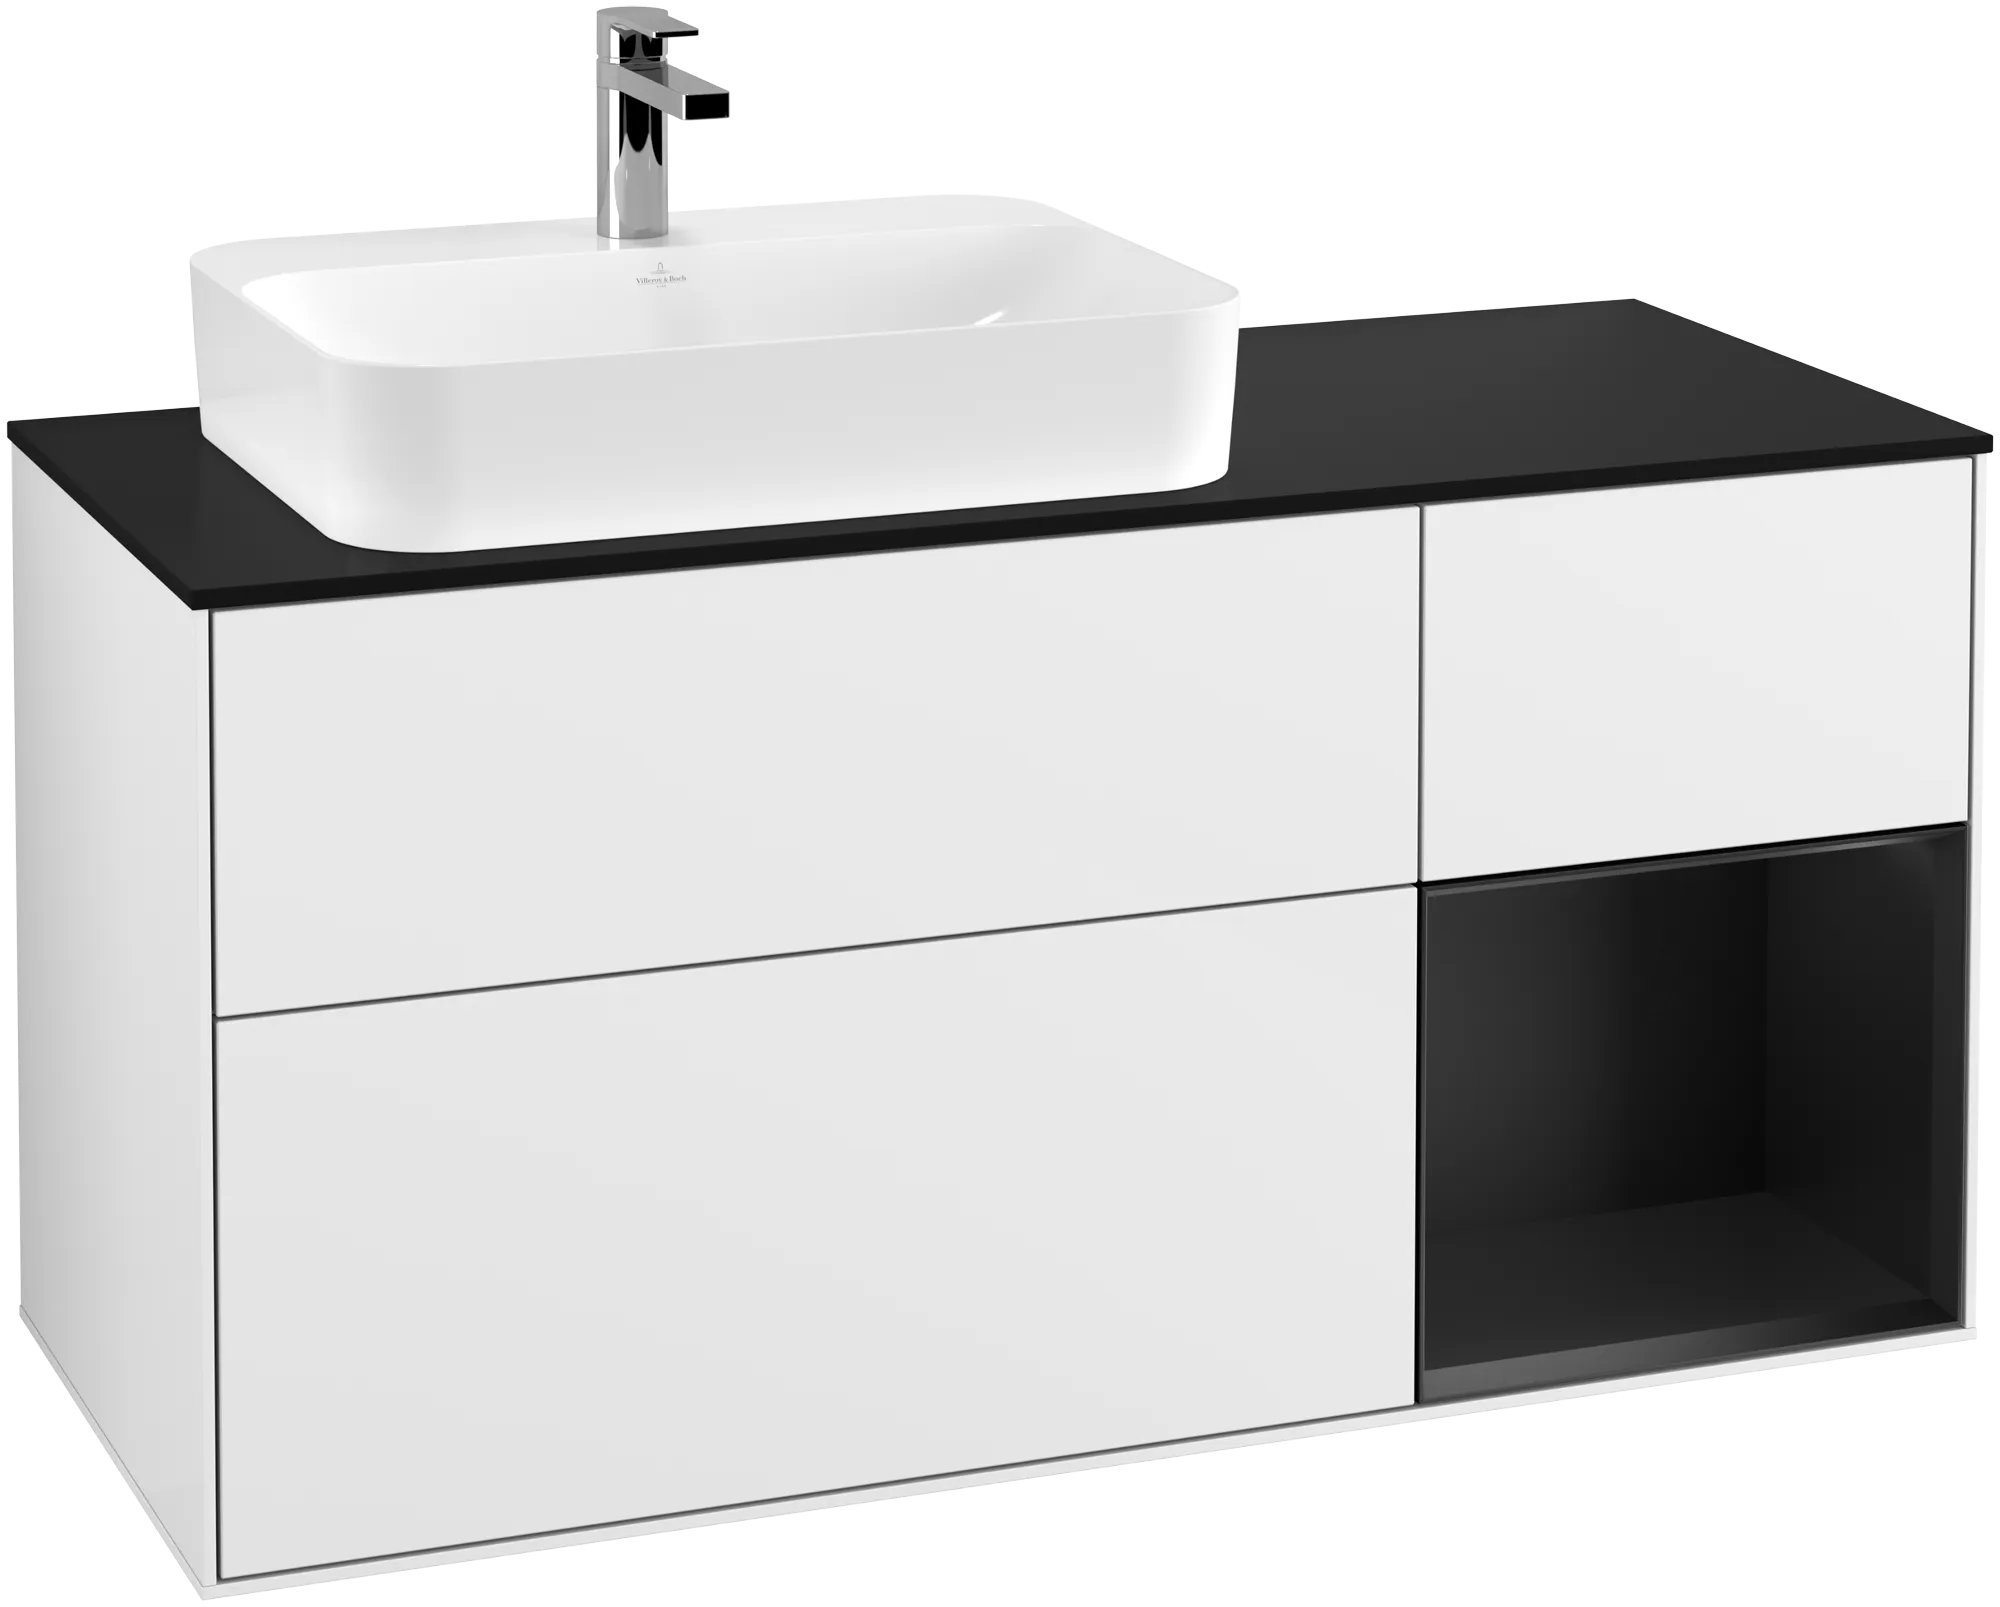 Picture of VILLEROY BOCH Finion Vanity unit, with lighting, 3 pull-out compartments, 1200 x 603 x 501 mm, Glossy White Lacquer / Black Matt Lacquer / Glass Black Matt #G402PDGF